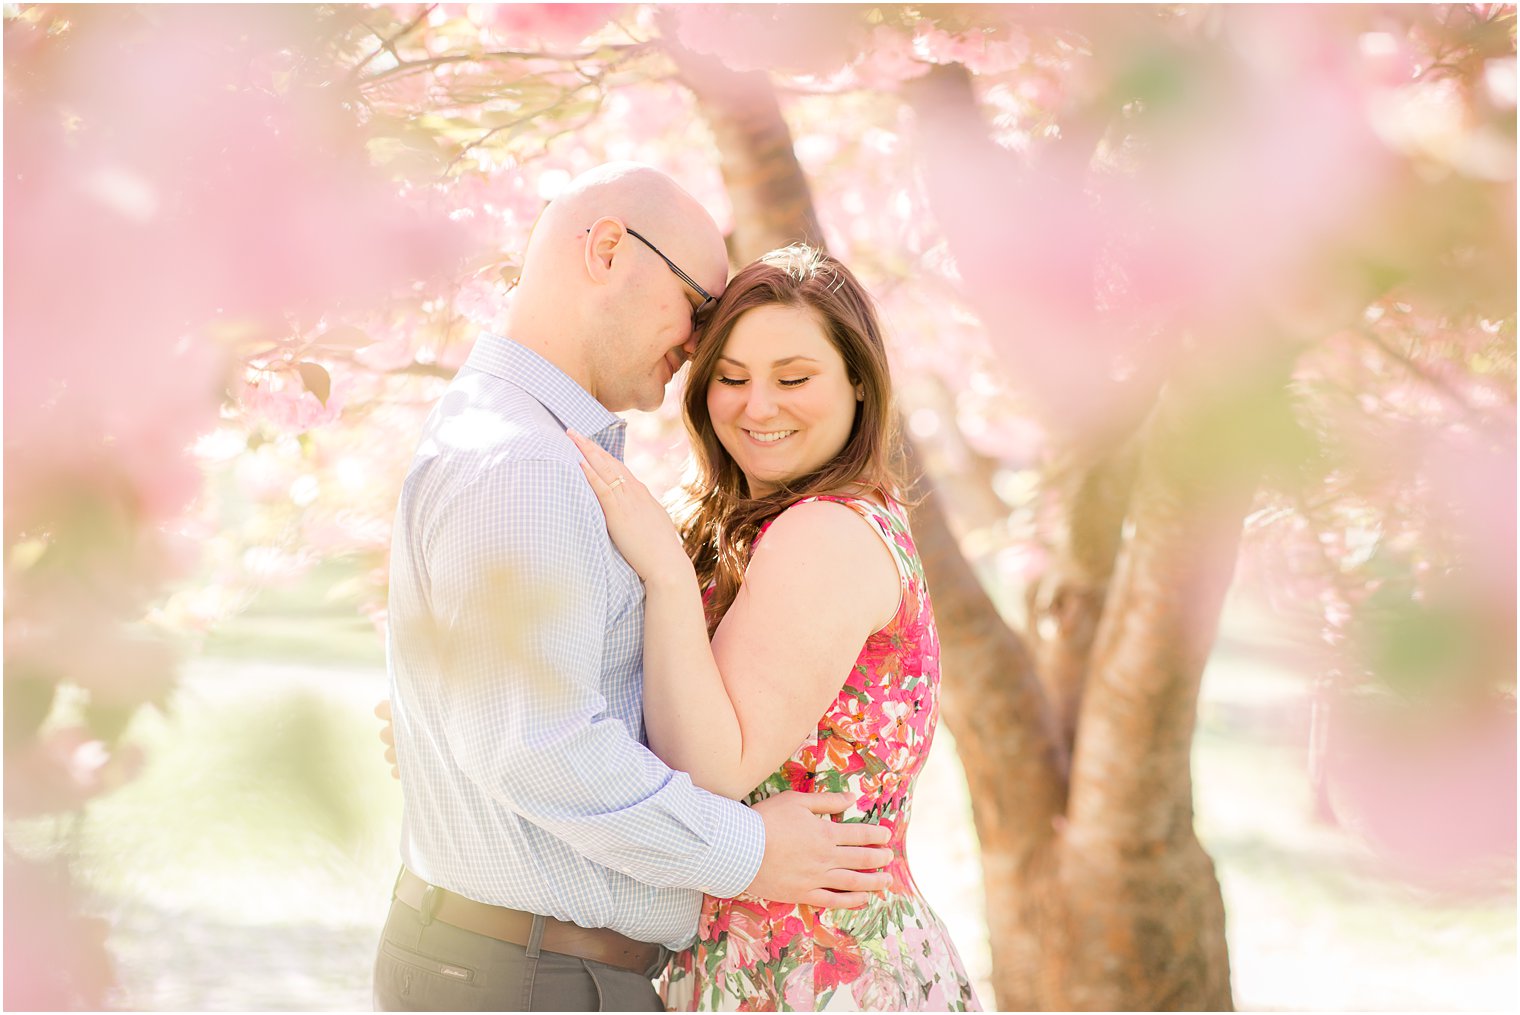 Romantic engagement photos in the cherry blossoms at Branch Brook Park